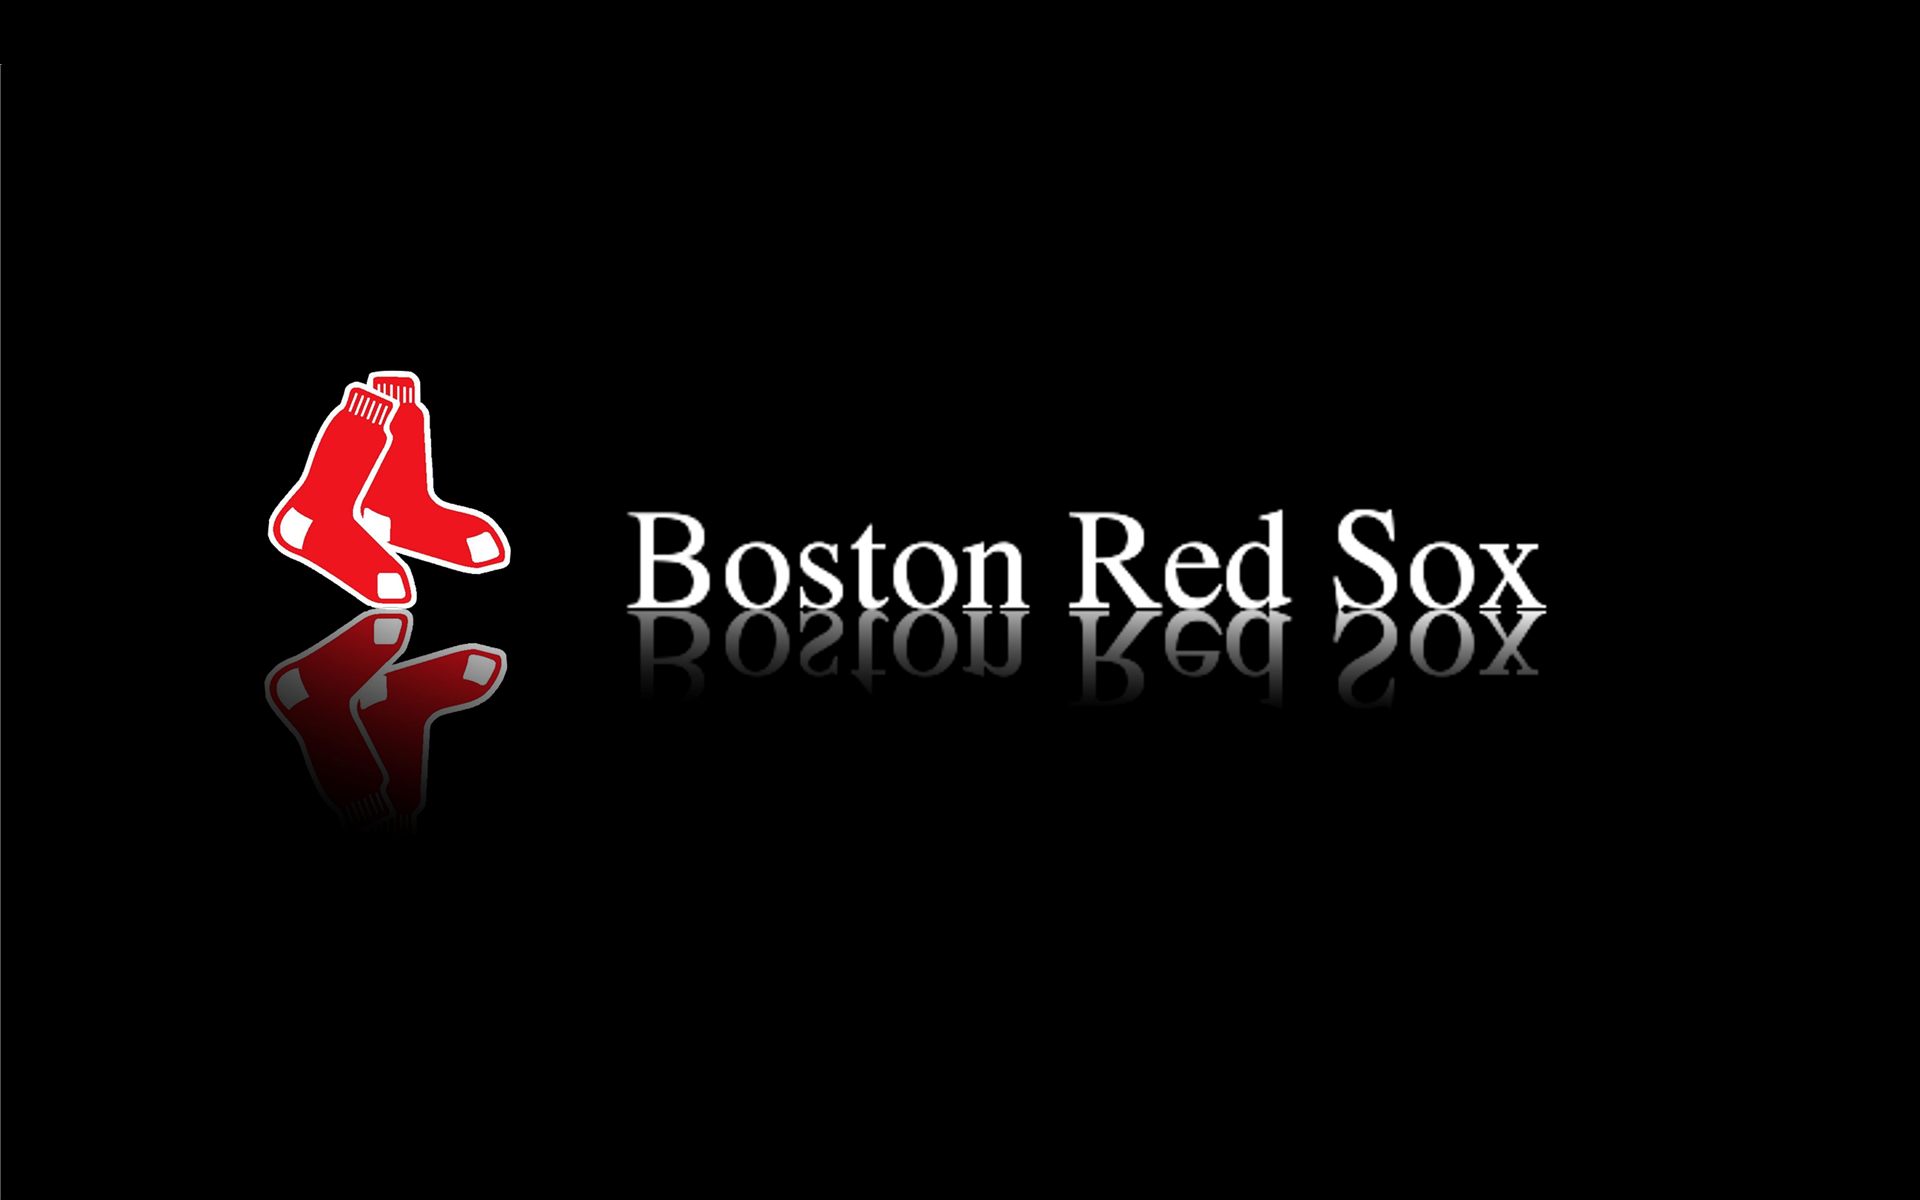 About Boston Red Sox Or Even Videos Related To